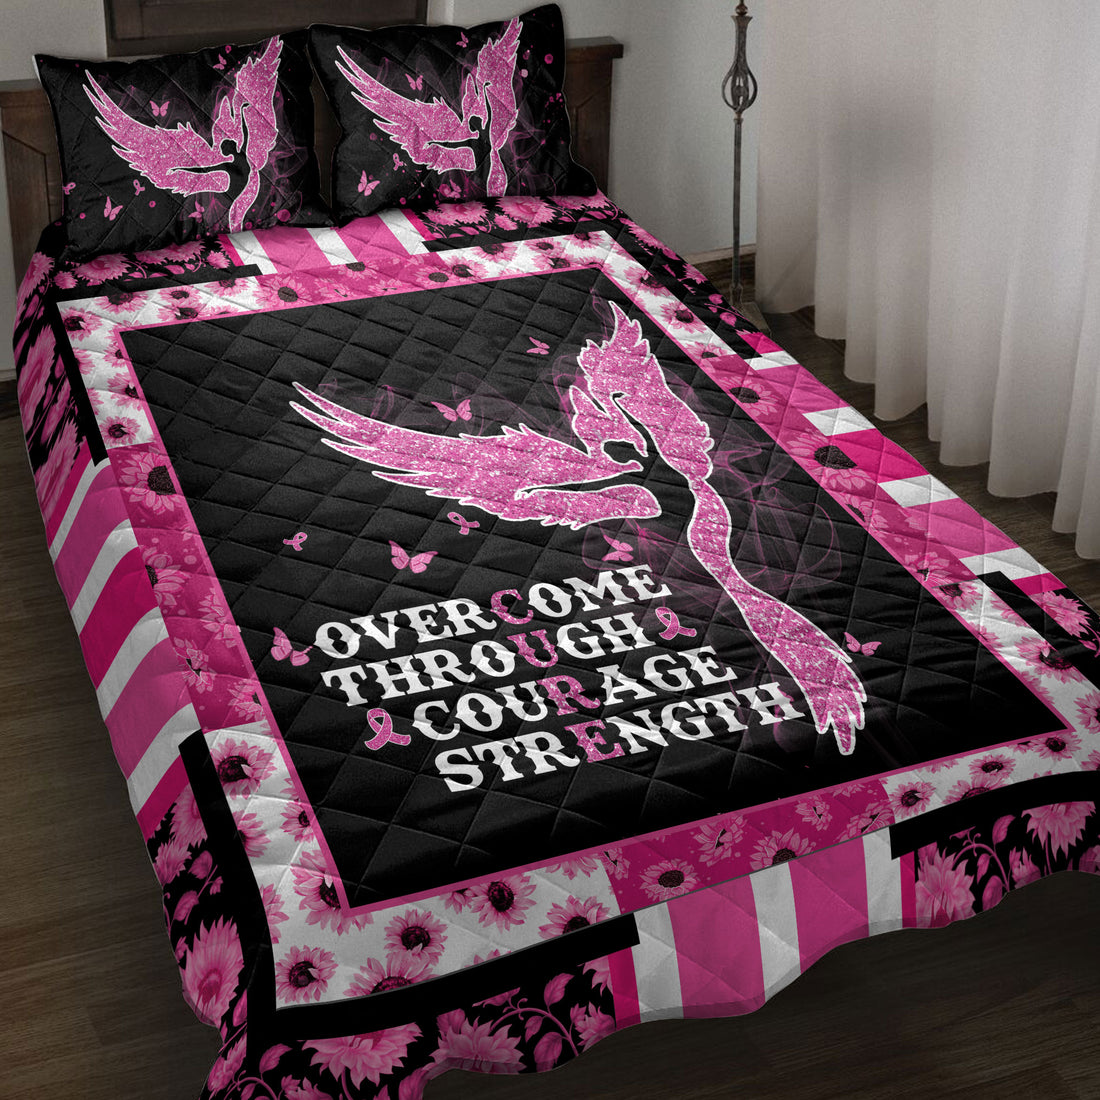 Ohaprints-Quilt-Bed-Set-Pillowcase-Breast-Cancer-Awareness-Pink-Angel-Cure-Unique-Idea-Blanket-Bedspread-Bedding-3872-Throw (55'' x 60'')